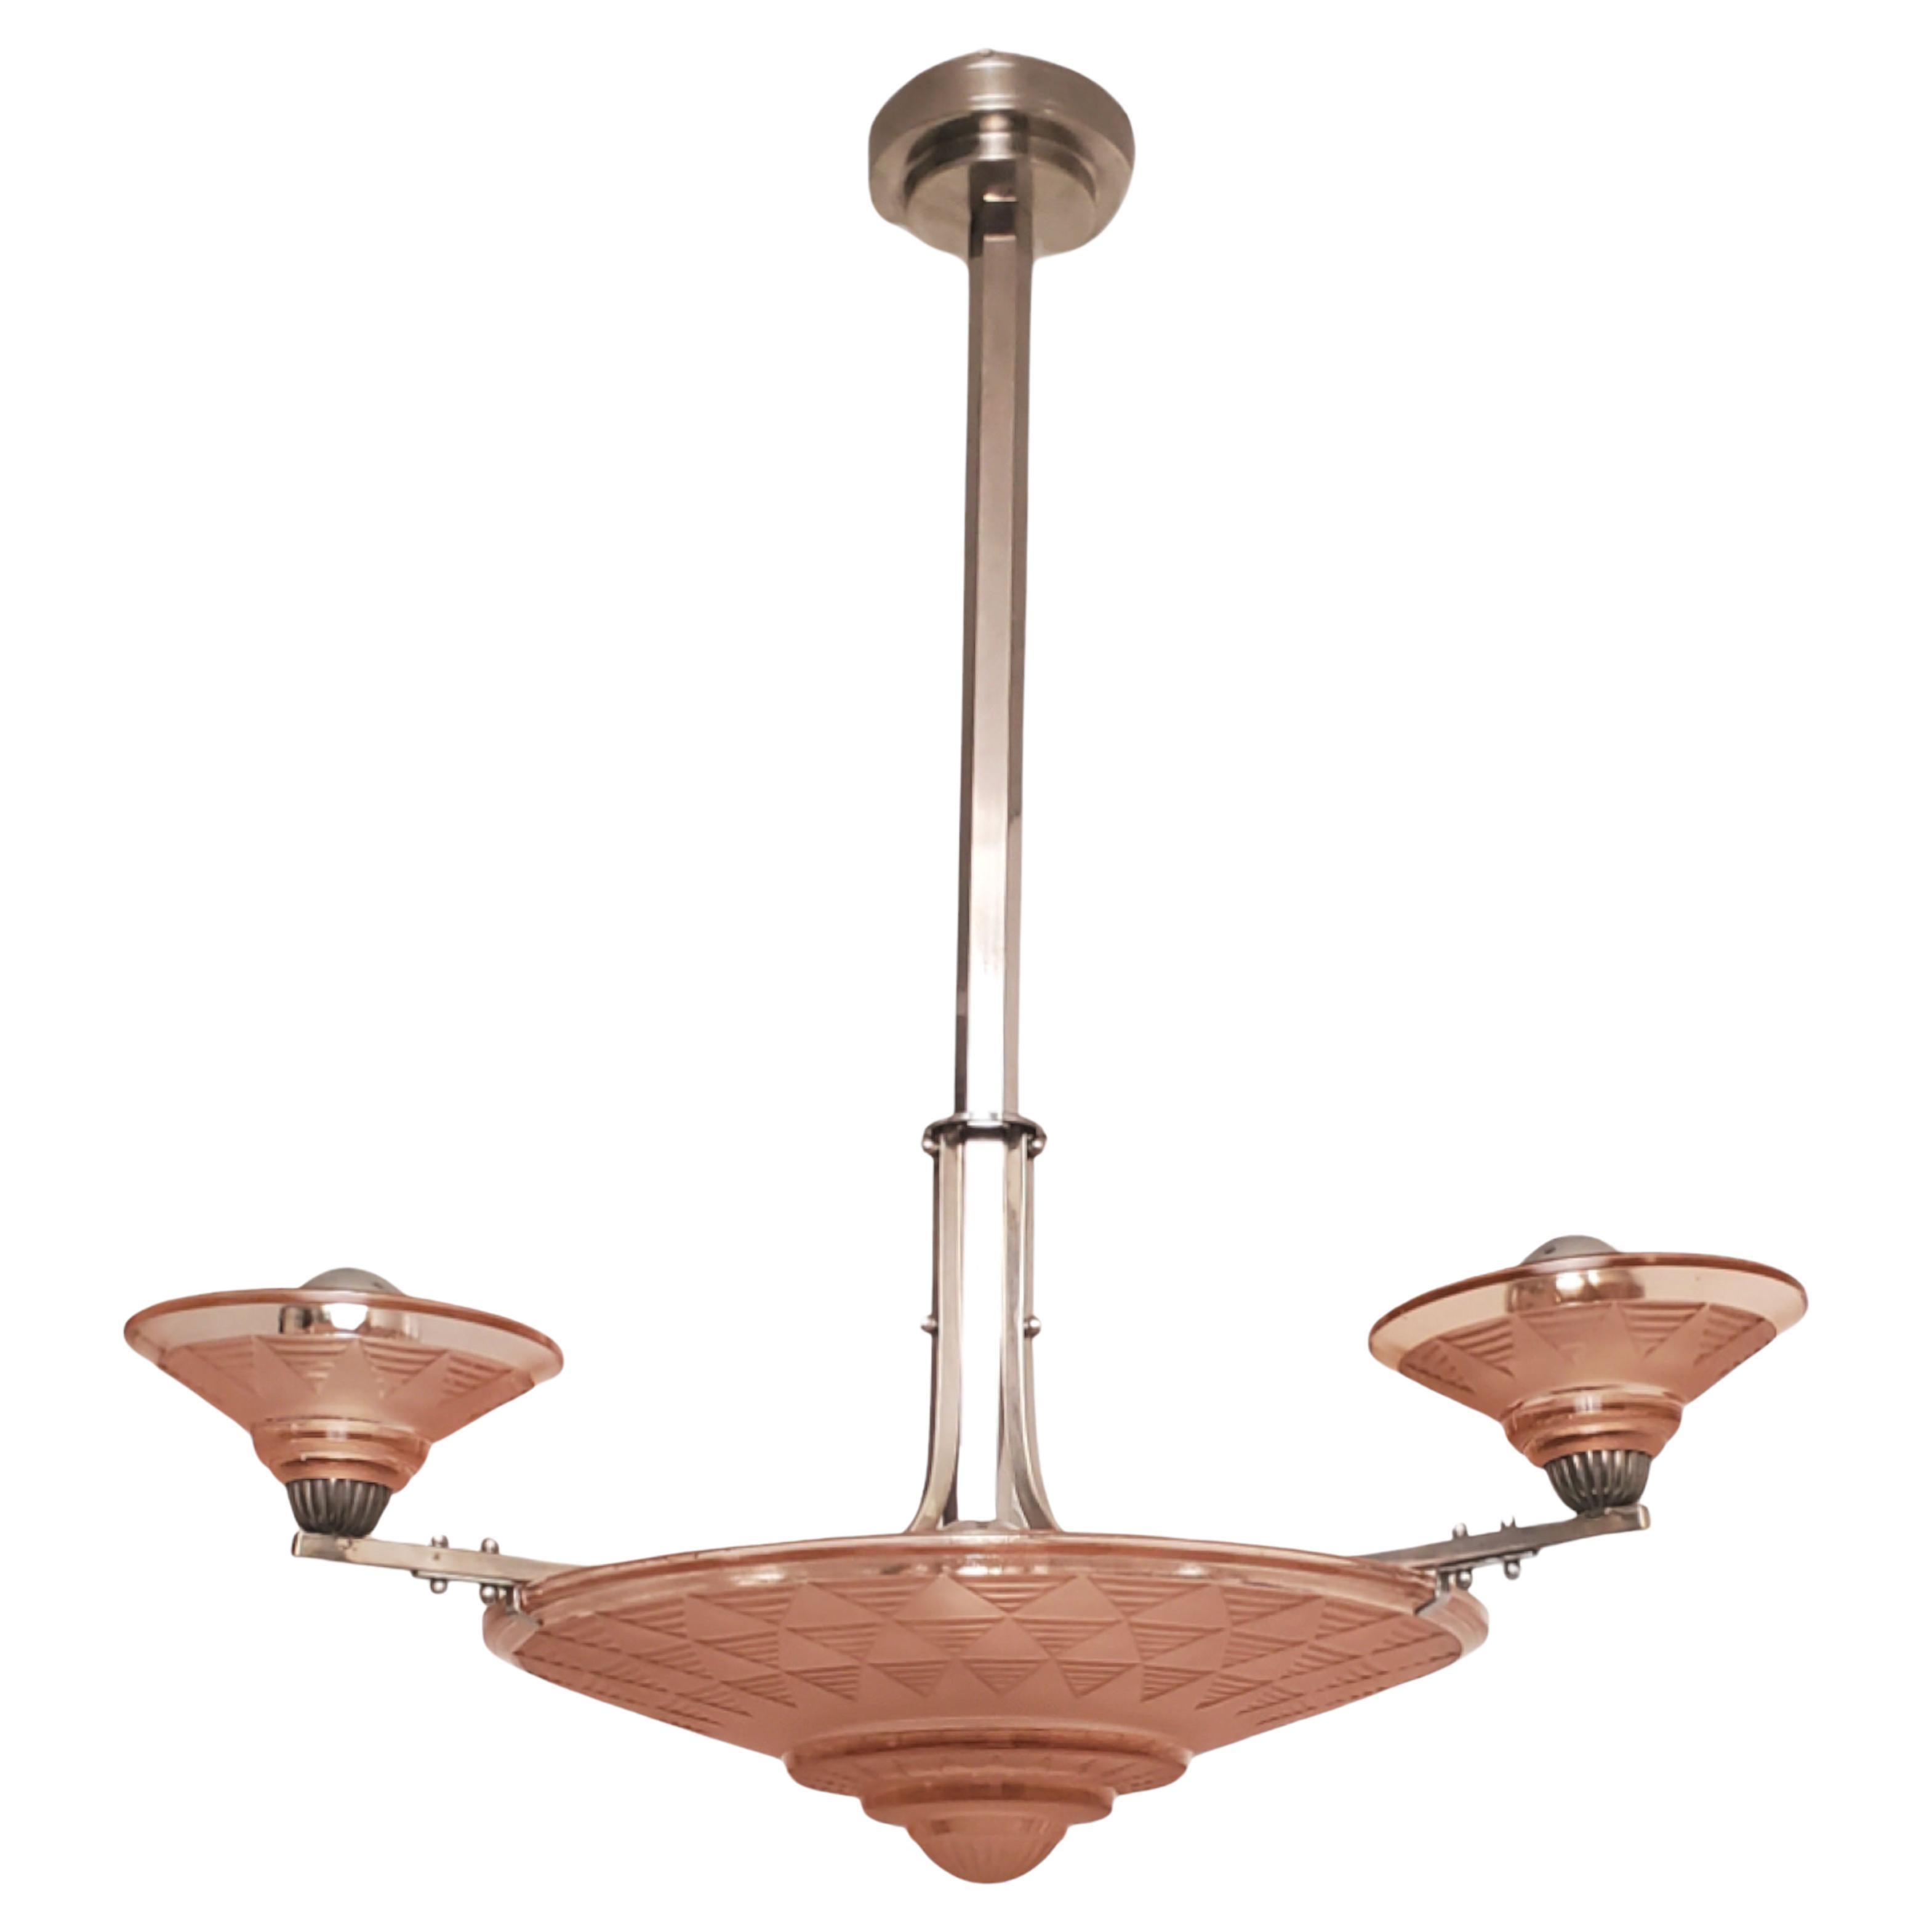 Petitot Art Deco peach /salmon /pink frosted glass + nickeled bronze chandelier For Sale